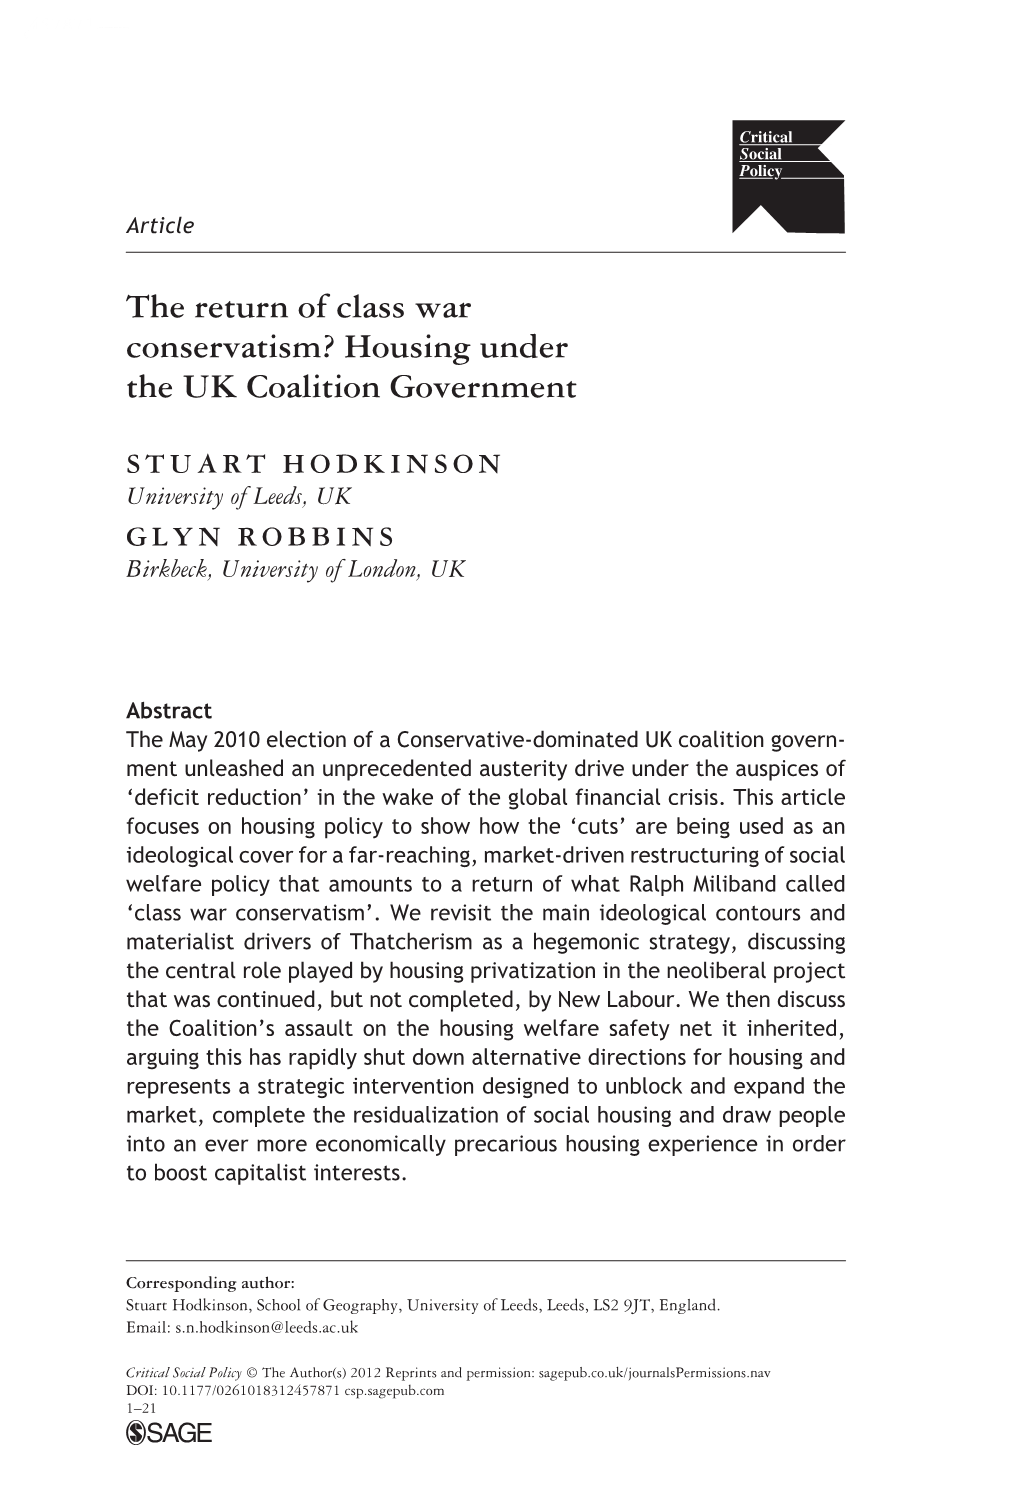 The Return of Class War Conservatism? Housing Under the UK Coalition Government